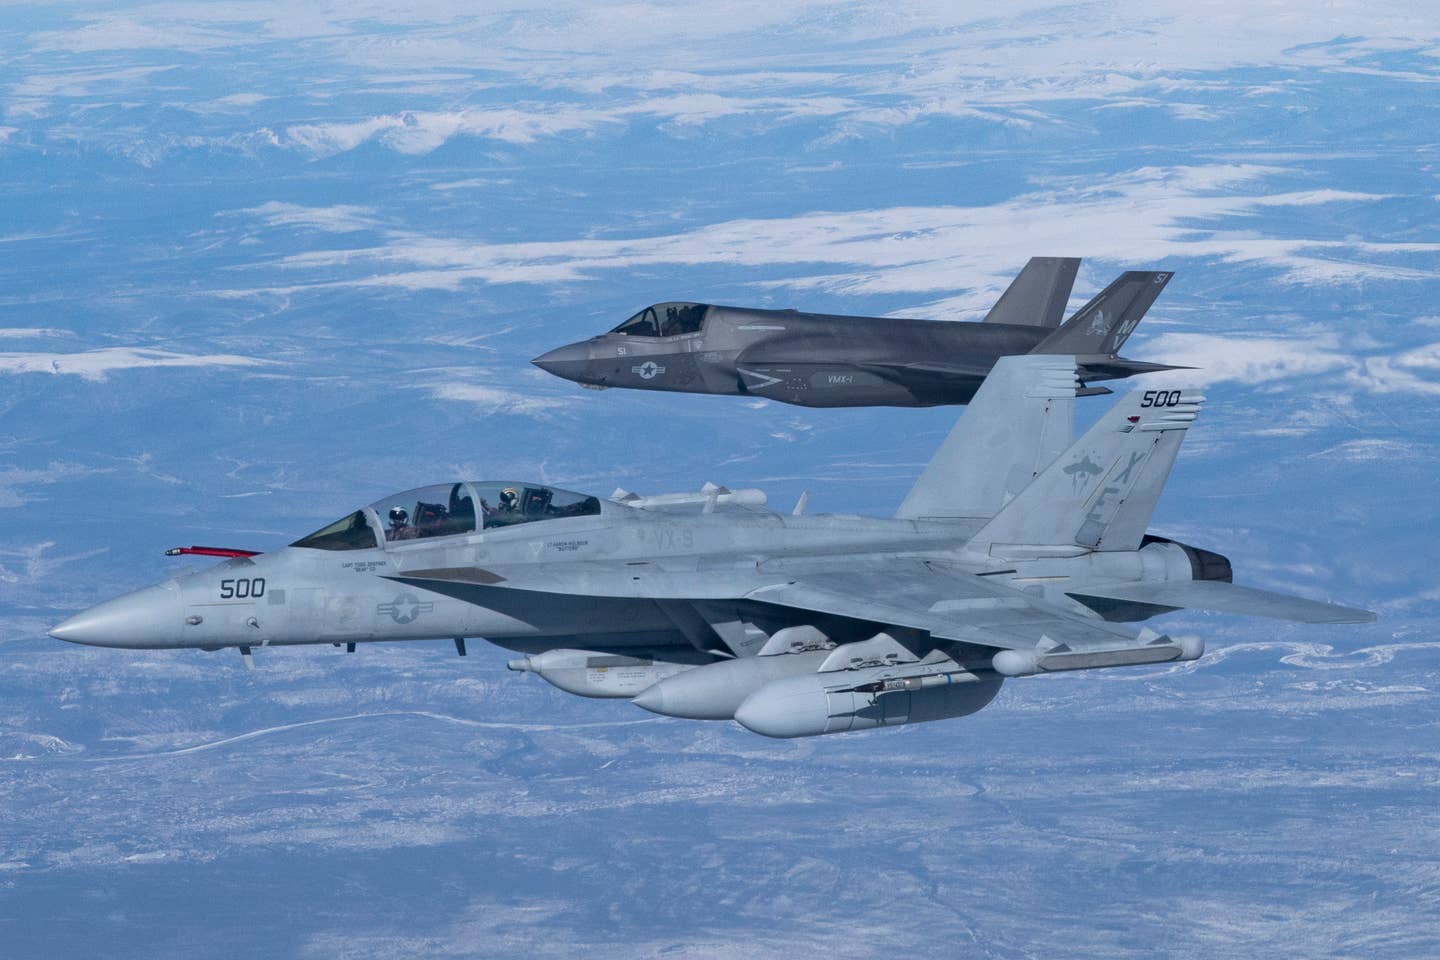 A U.S. Navy EA-18G “Growler” assigned to the Air Test and Evaluation Squadron Nine (VX-9) (front) and a U.S. Marine Corps F-35B Lightning assigned Marine Operational Test and Evaluation Squadron One (VMX-1), receives fuel from a Royal Air Force KC-30 Voyager during Northern Edge 23-1 at Joint Base Elmendorf-Richardson, Alaska, May 9, 2023. Northern Edge 23-1 will provide an opportunity for joint, multinational and multi-domain operations designed to implement high-end, realistic war fighter training, develop and improve joint interoperability, and enhance the combat readiness of participating forces. (U.S. Air Force photo by Airman 1st Class Shelimar Rivera Rosado)